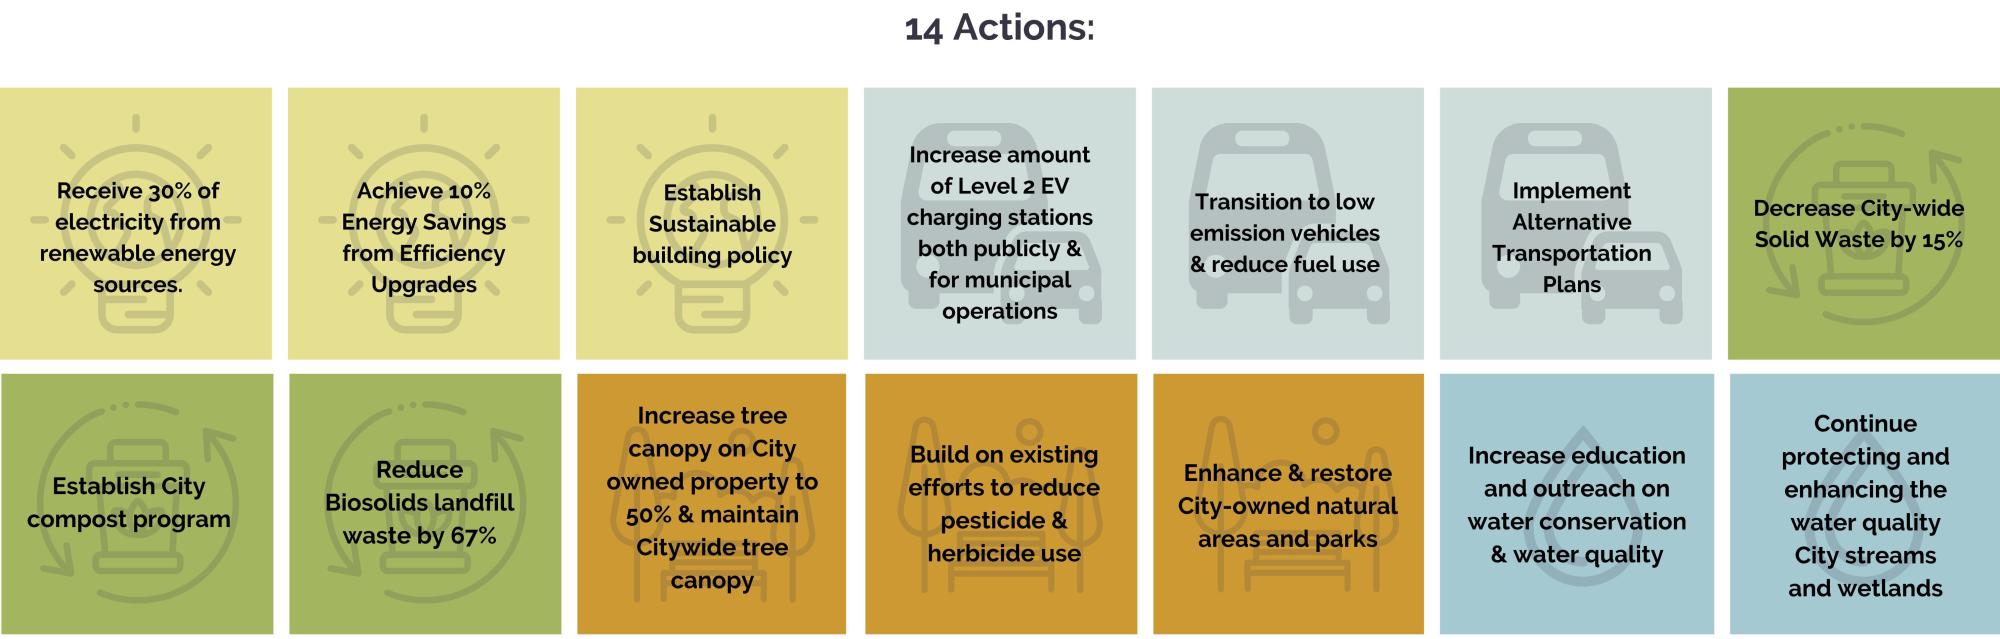 Sustainability plan actions